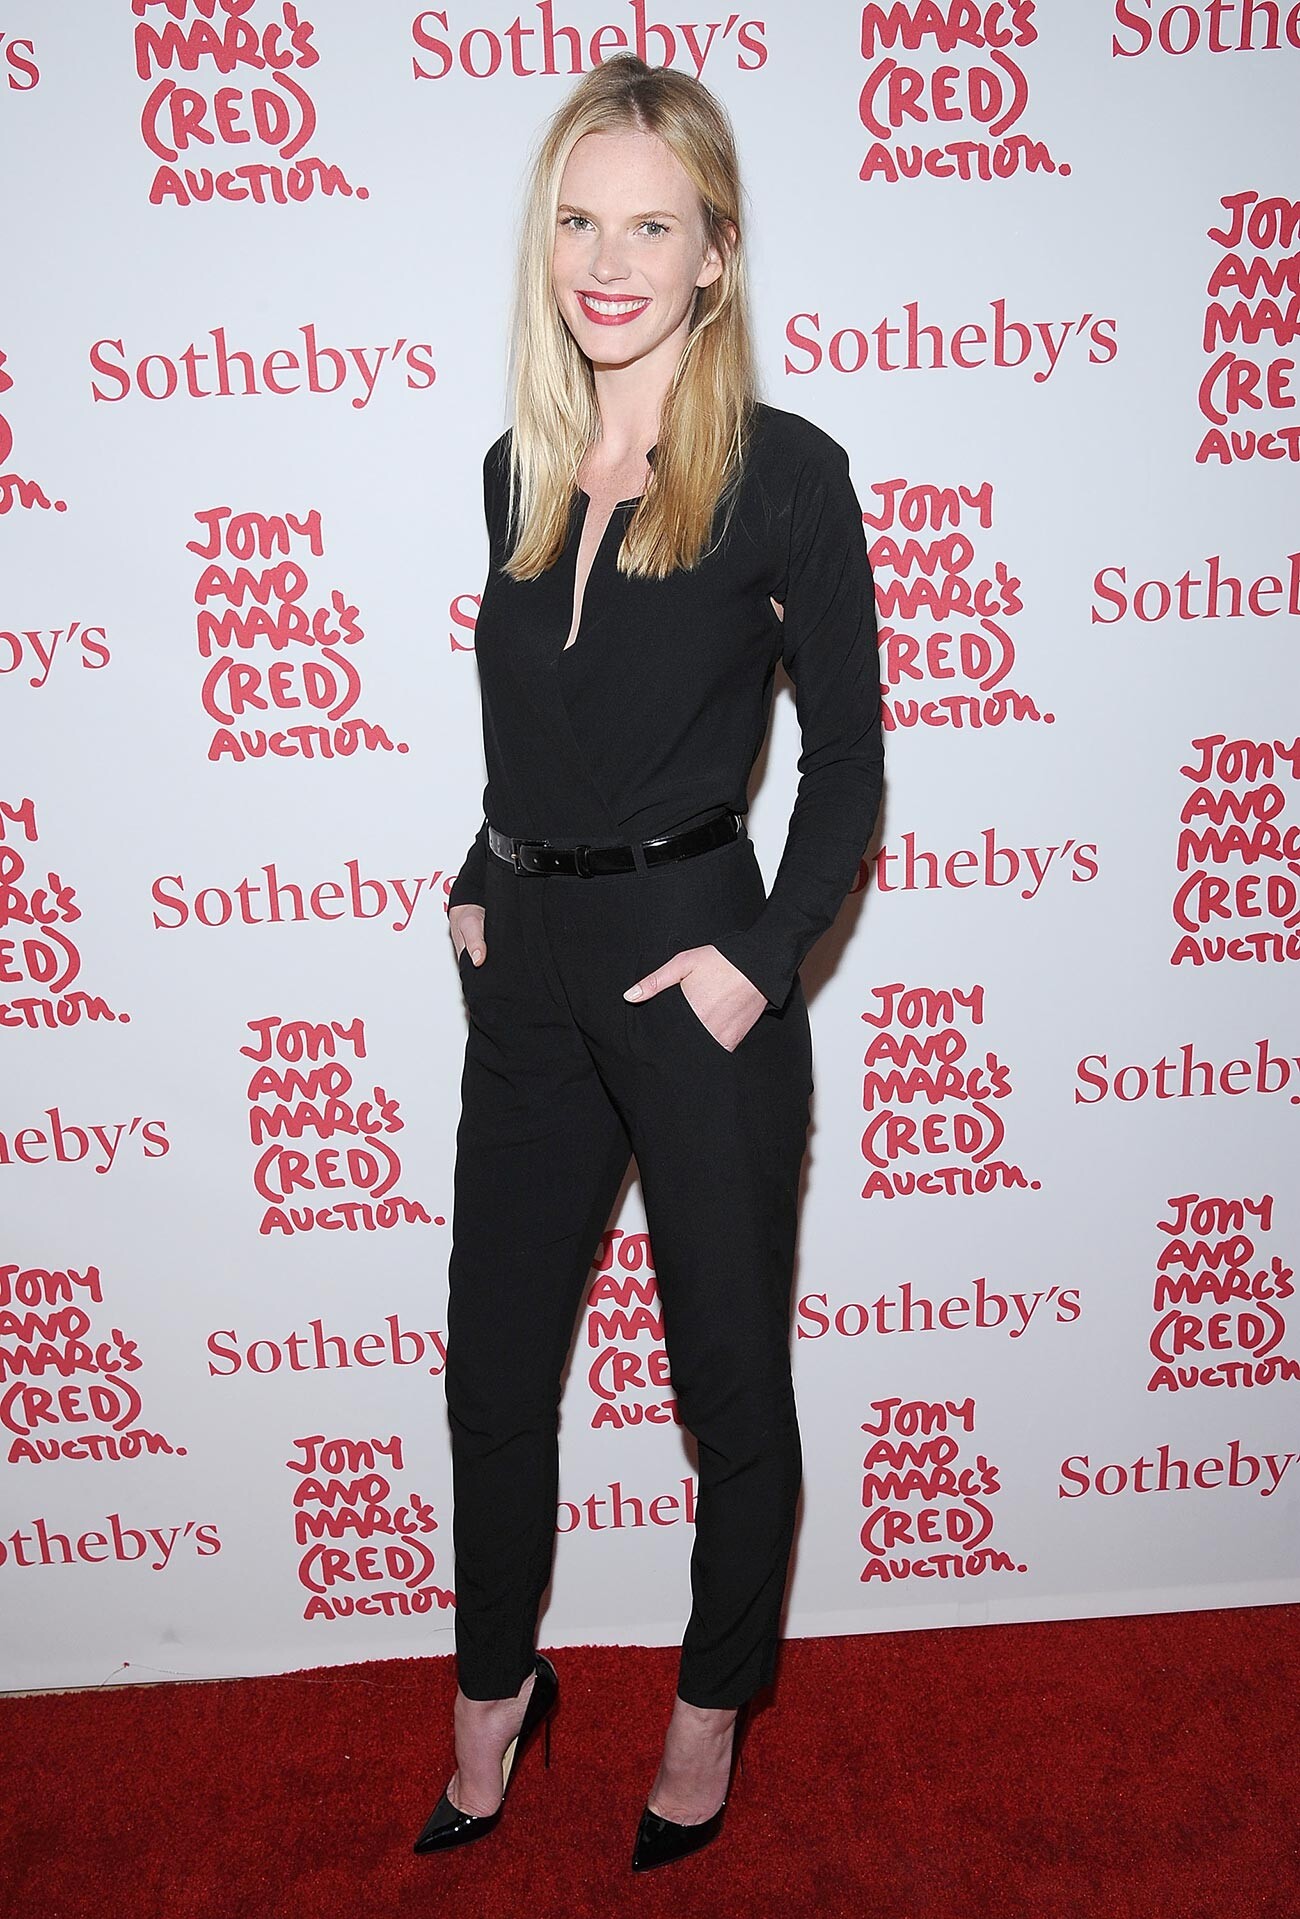 Model Anna Vyalitsyna attends the 2013 (RED) Auction Celebrating Masterworks Of Design and Innovation at Sotheby's on November 23, 2013 in New York City. --- 